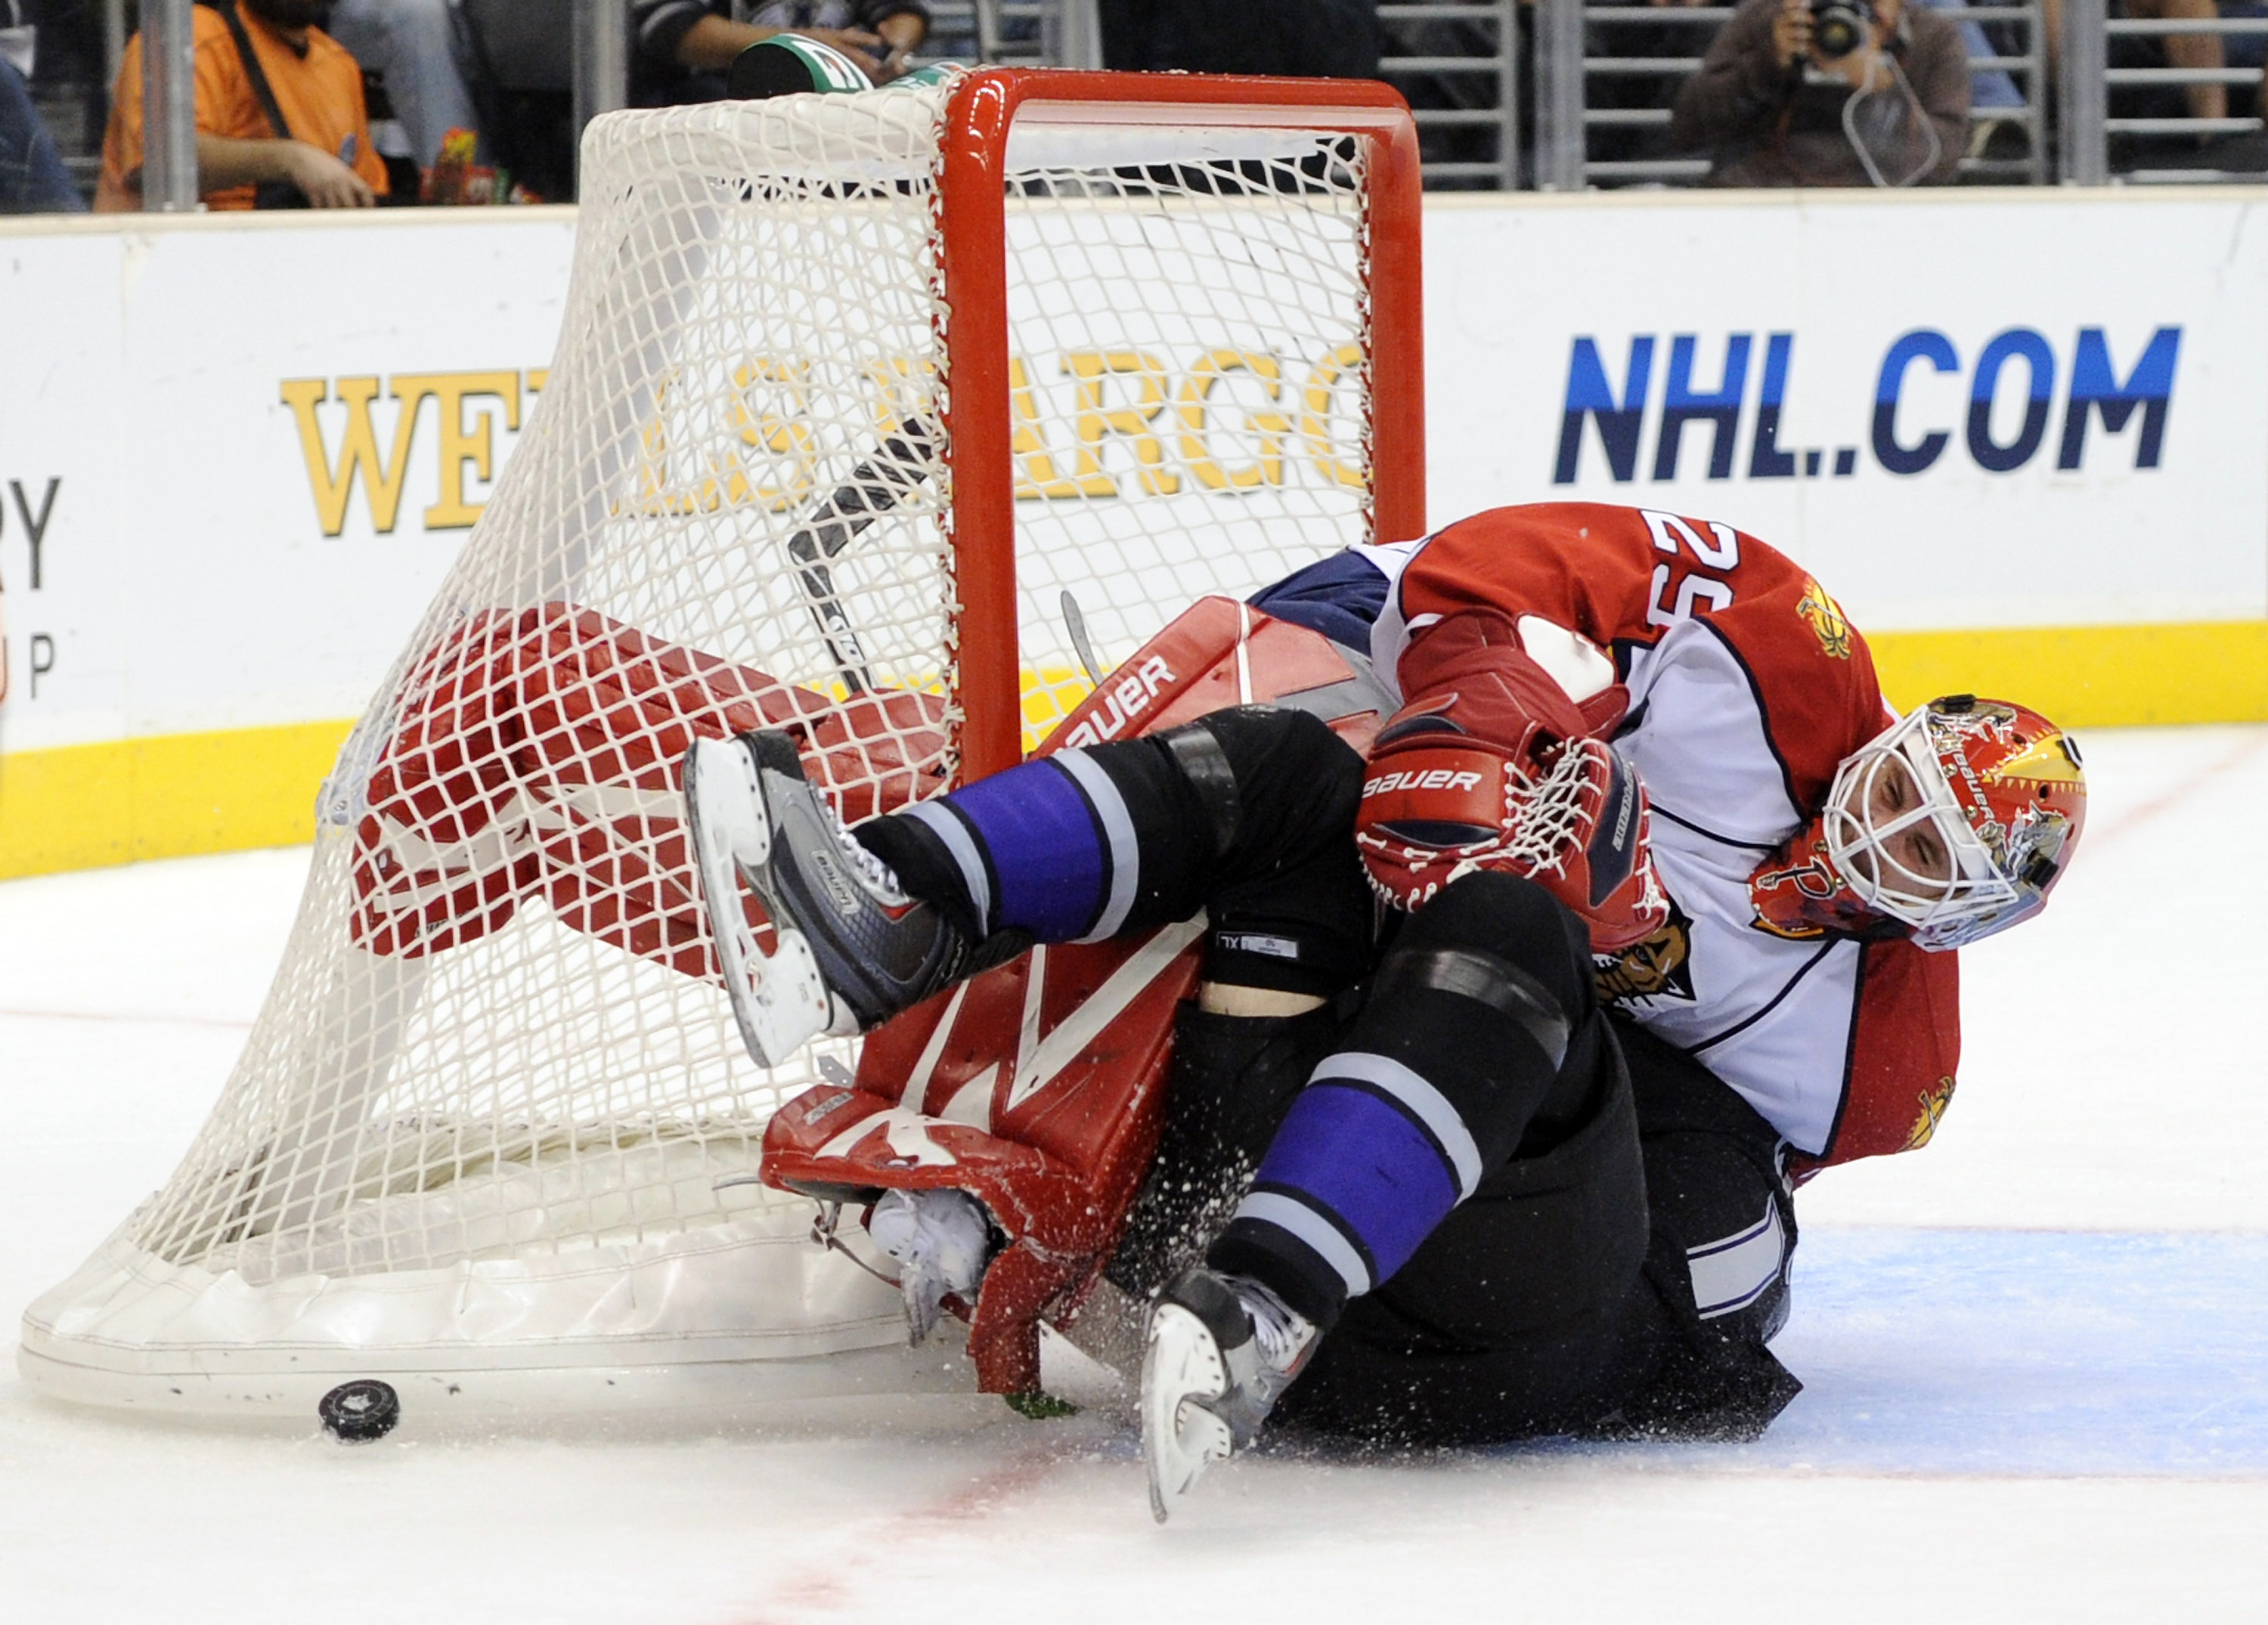 LOS ANGELES, CA - DECEMBER 02:  Tomas Vokoun #29 of the Florida Panthers is knocked to the ice by a fallen Justin Williams #14 of the Los Angeles Kings during the second period on December 2, 2010 in Los Angeles, California.  (Photo by Harry How/Getty Ima